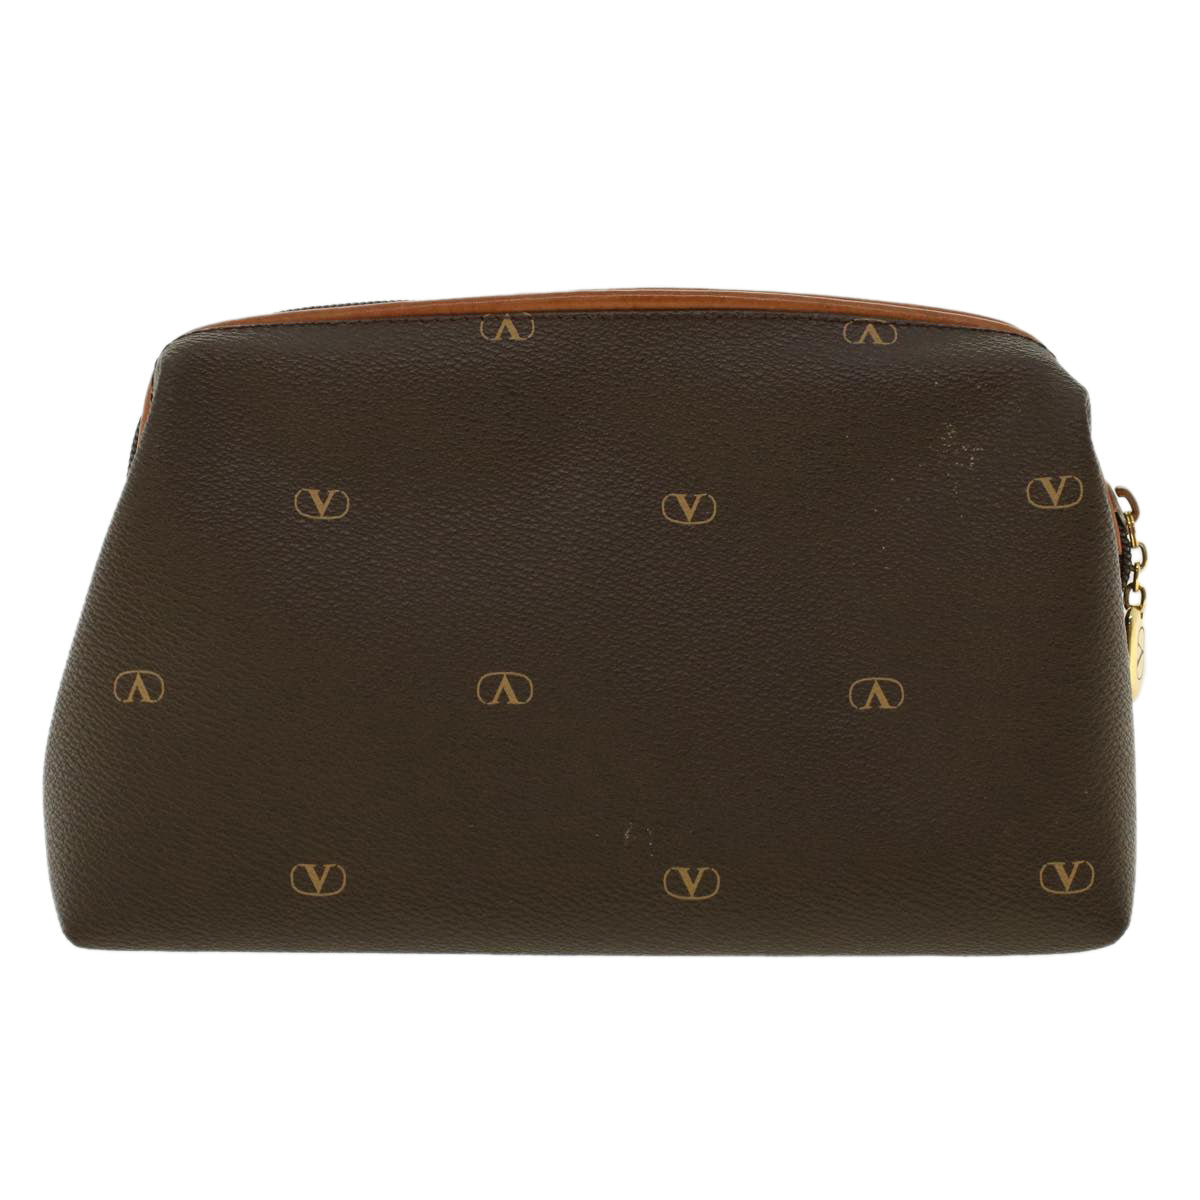 VALENTINO Clutch Bag Leather Brown Auth ar9399 - 0